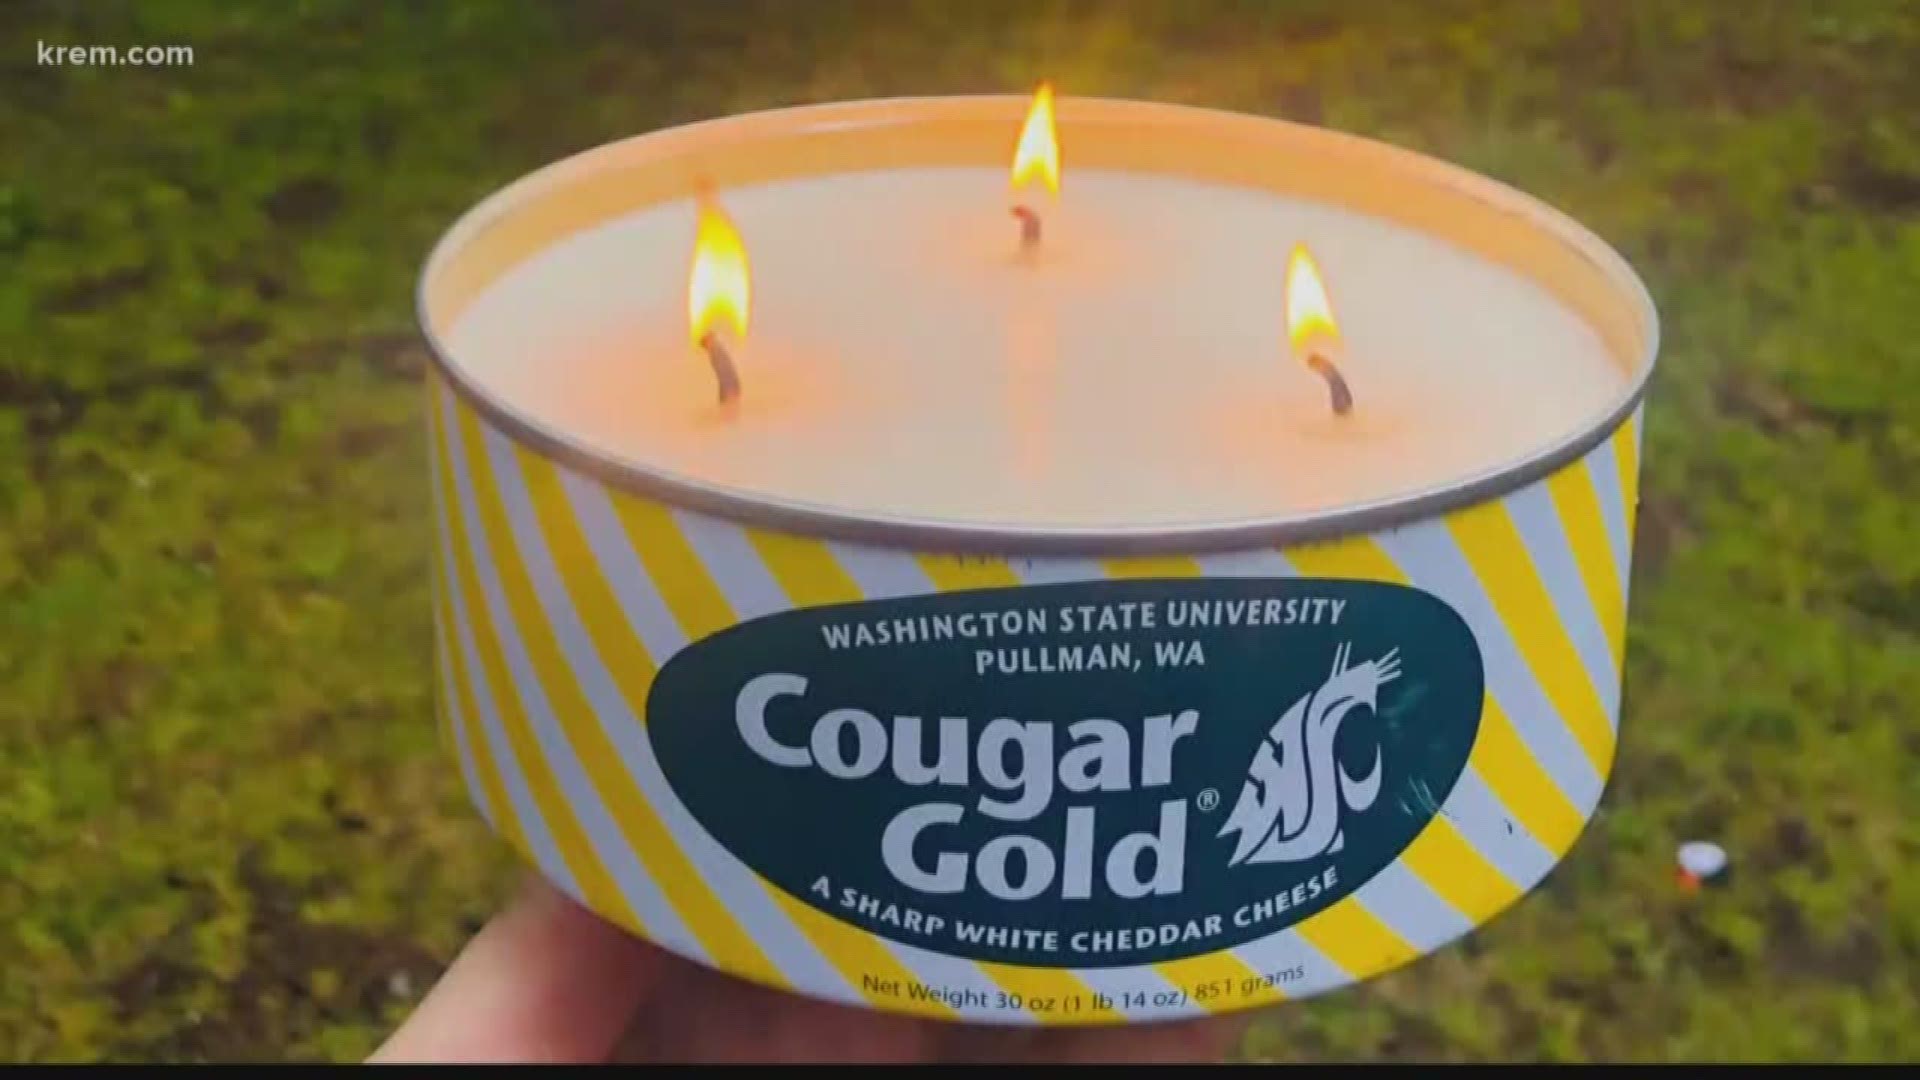 WSU alum Christine Smithberg turns empty cans of the school's iconic Cougar Gold cheese into candles. She then donates the money to Hilinski's Hope.